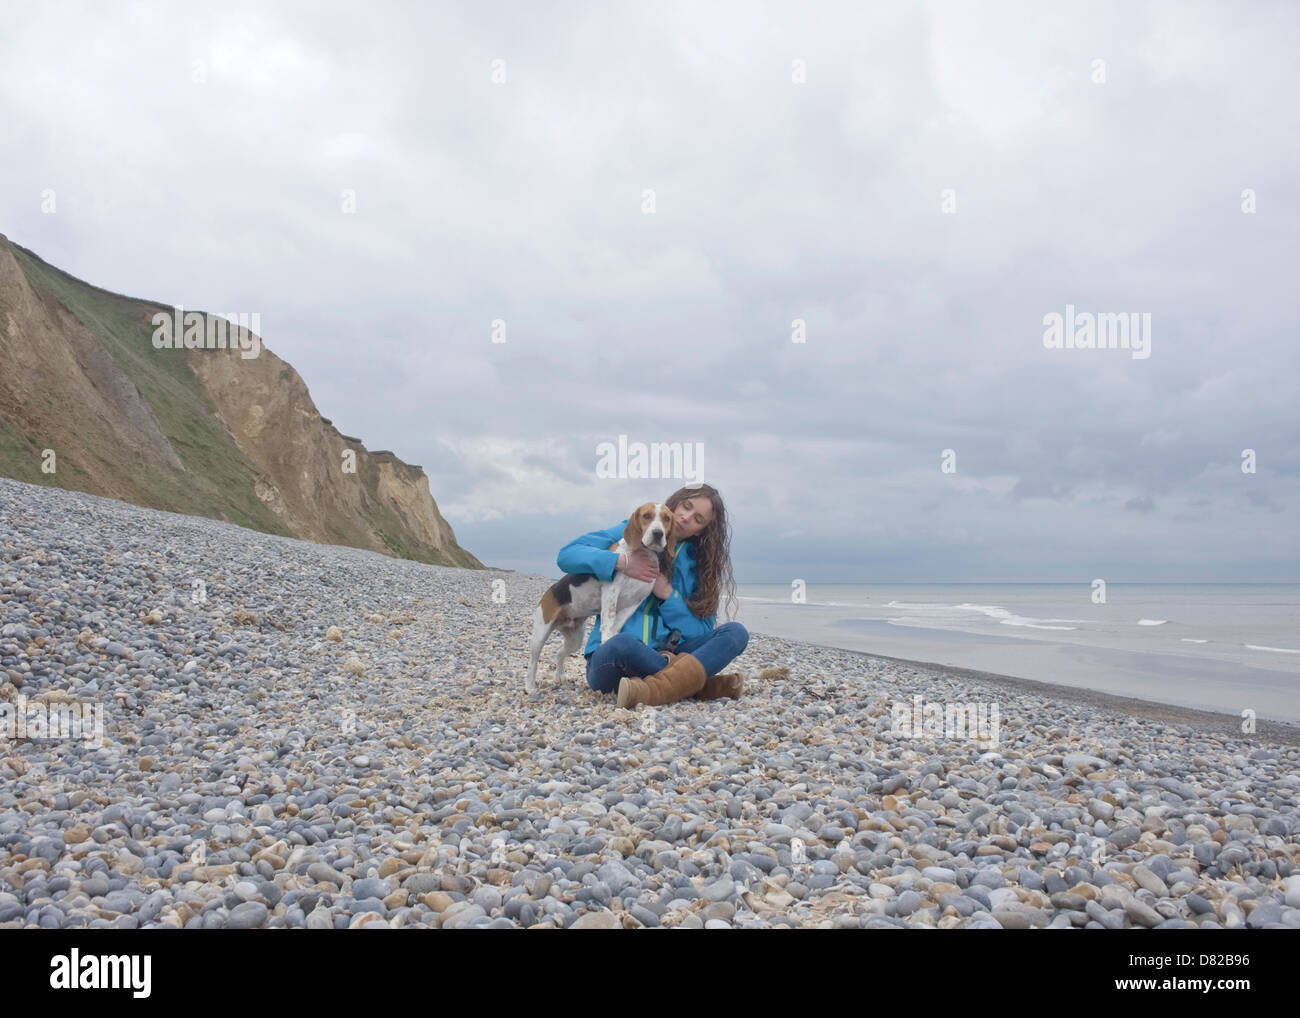 Woman sitting cross-legged on pebble beach fussing dog. Cliffs and sea in background. Stock Photo